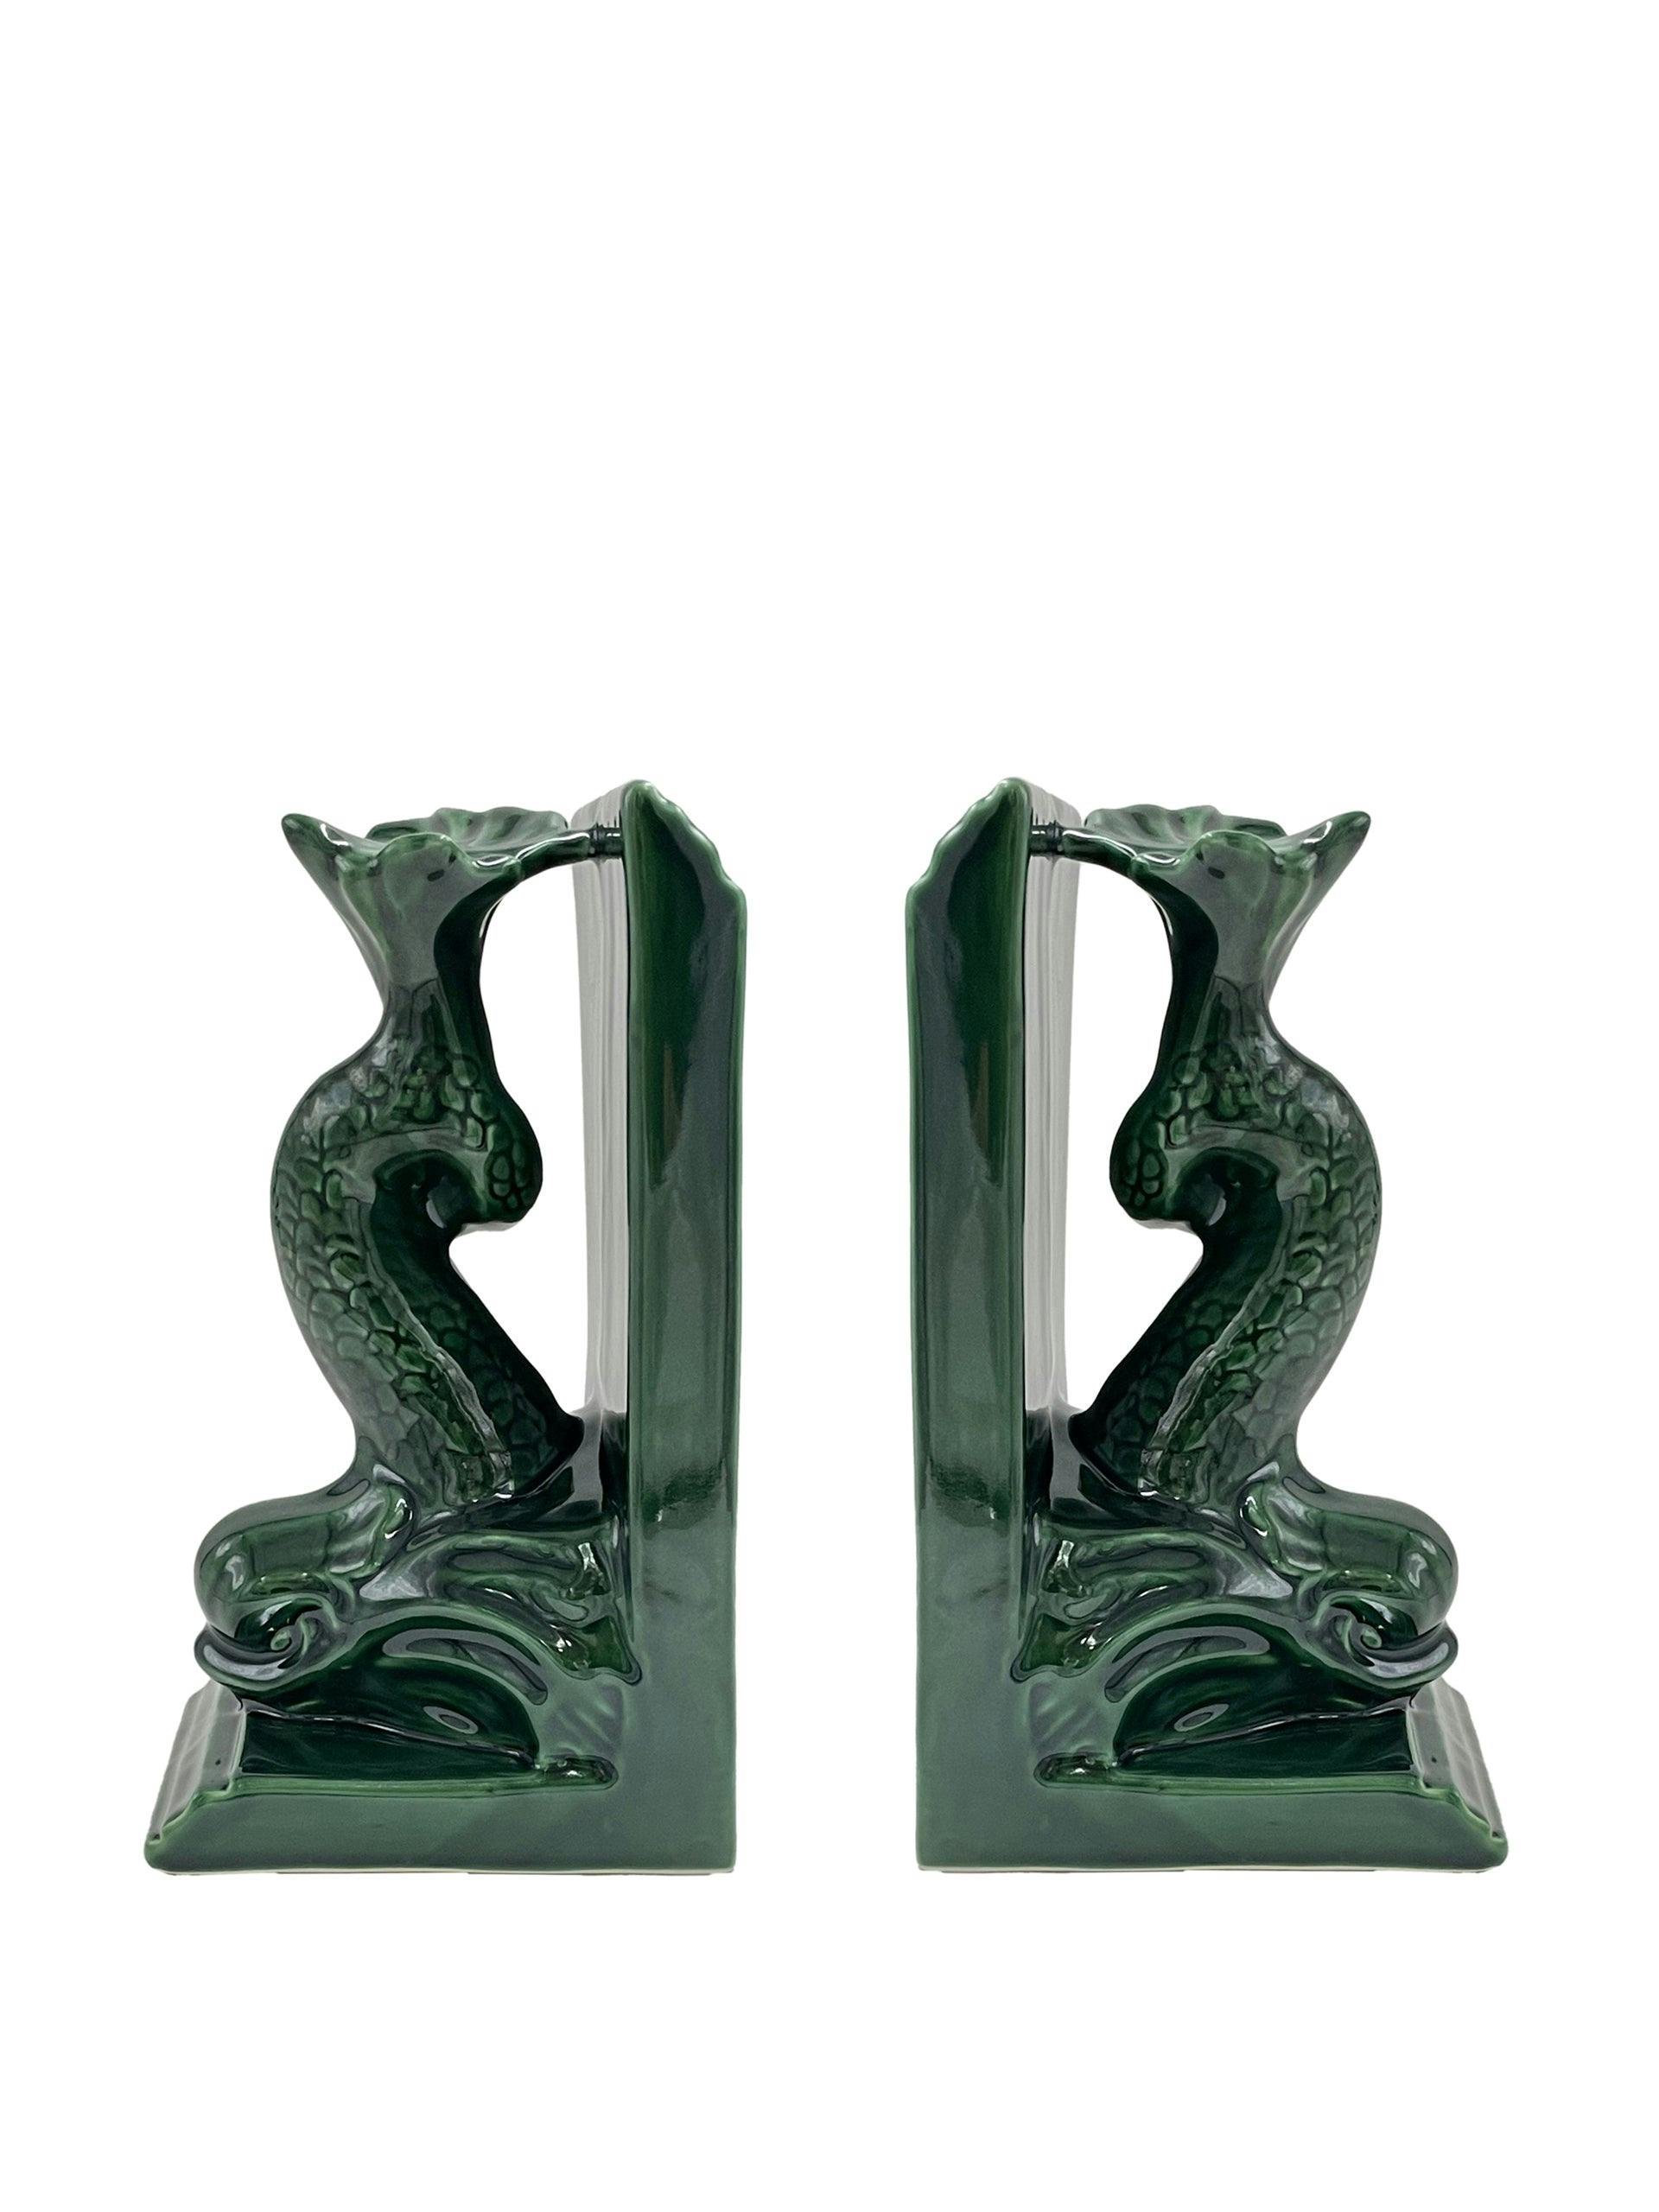 Pair of dolphin bookends in emerald green